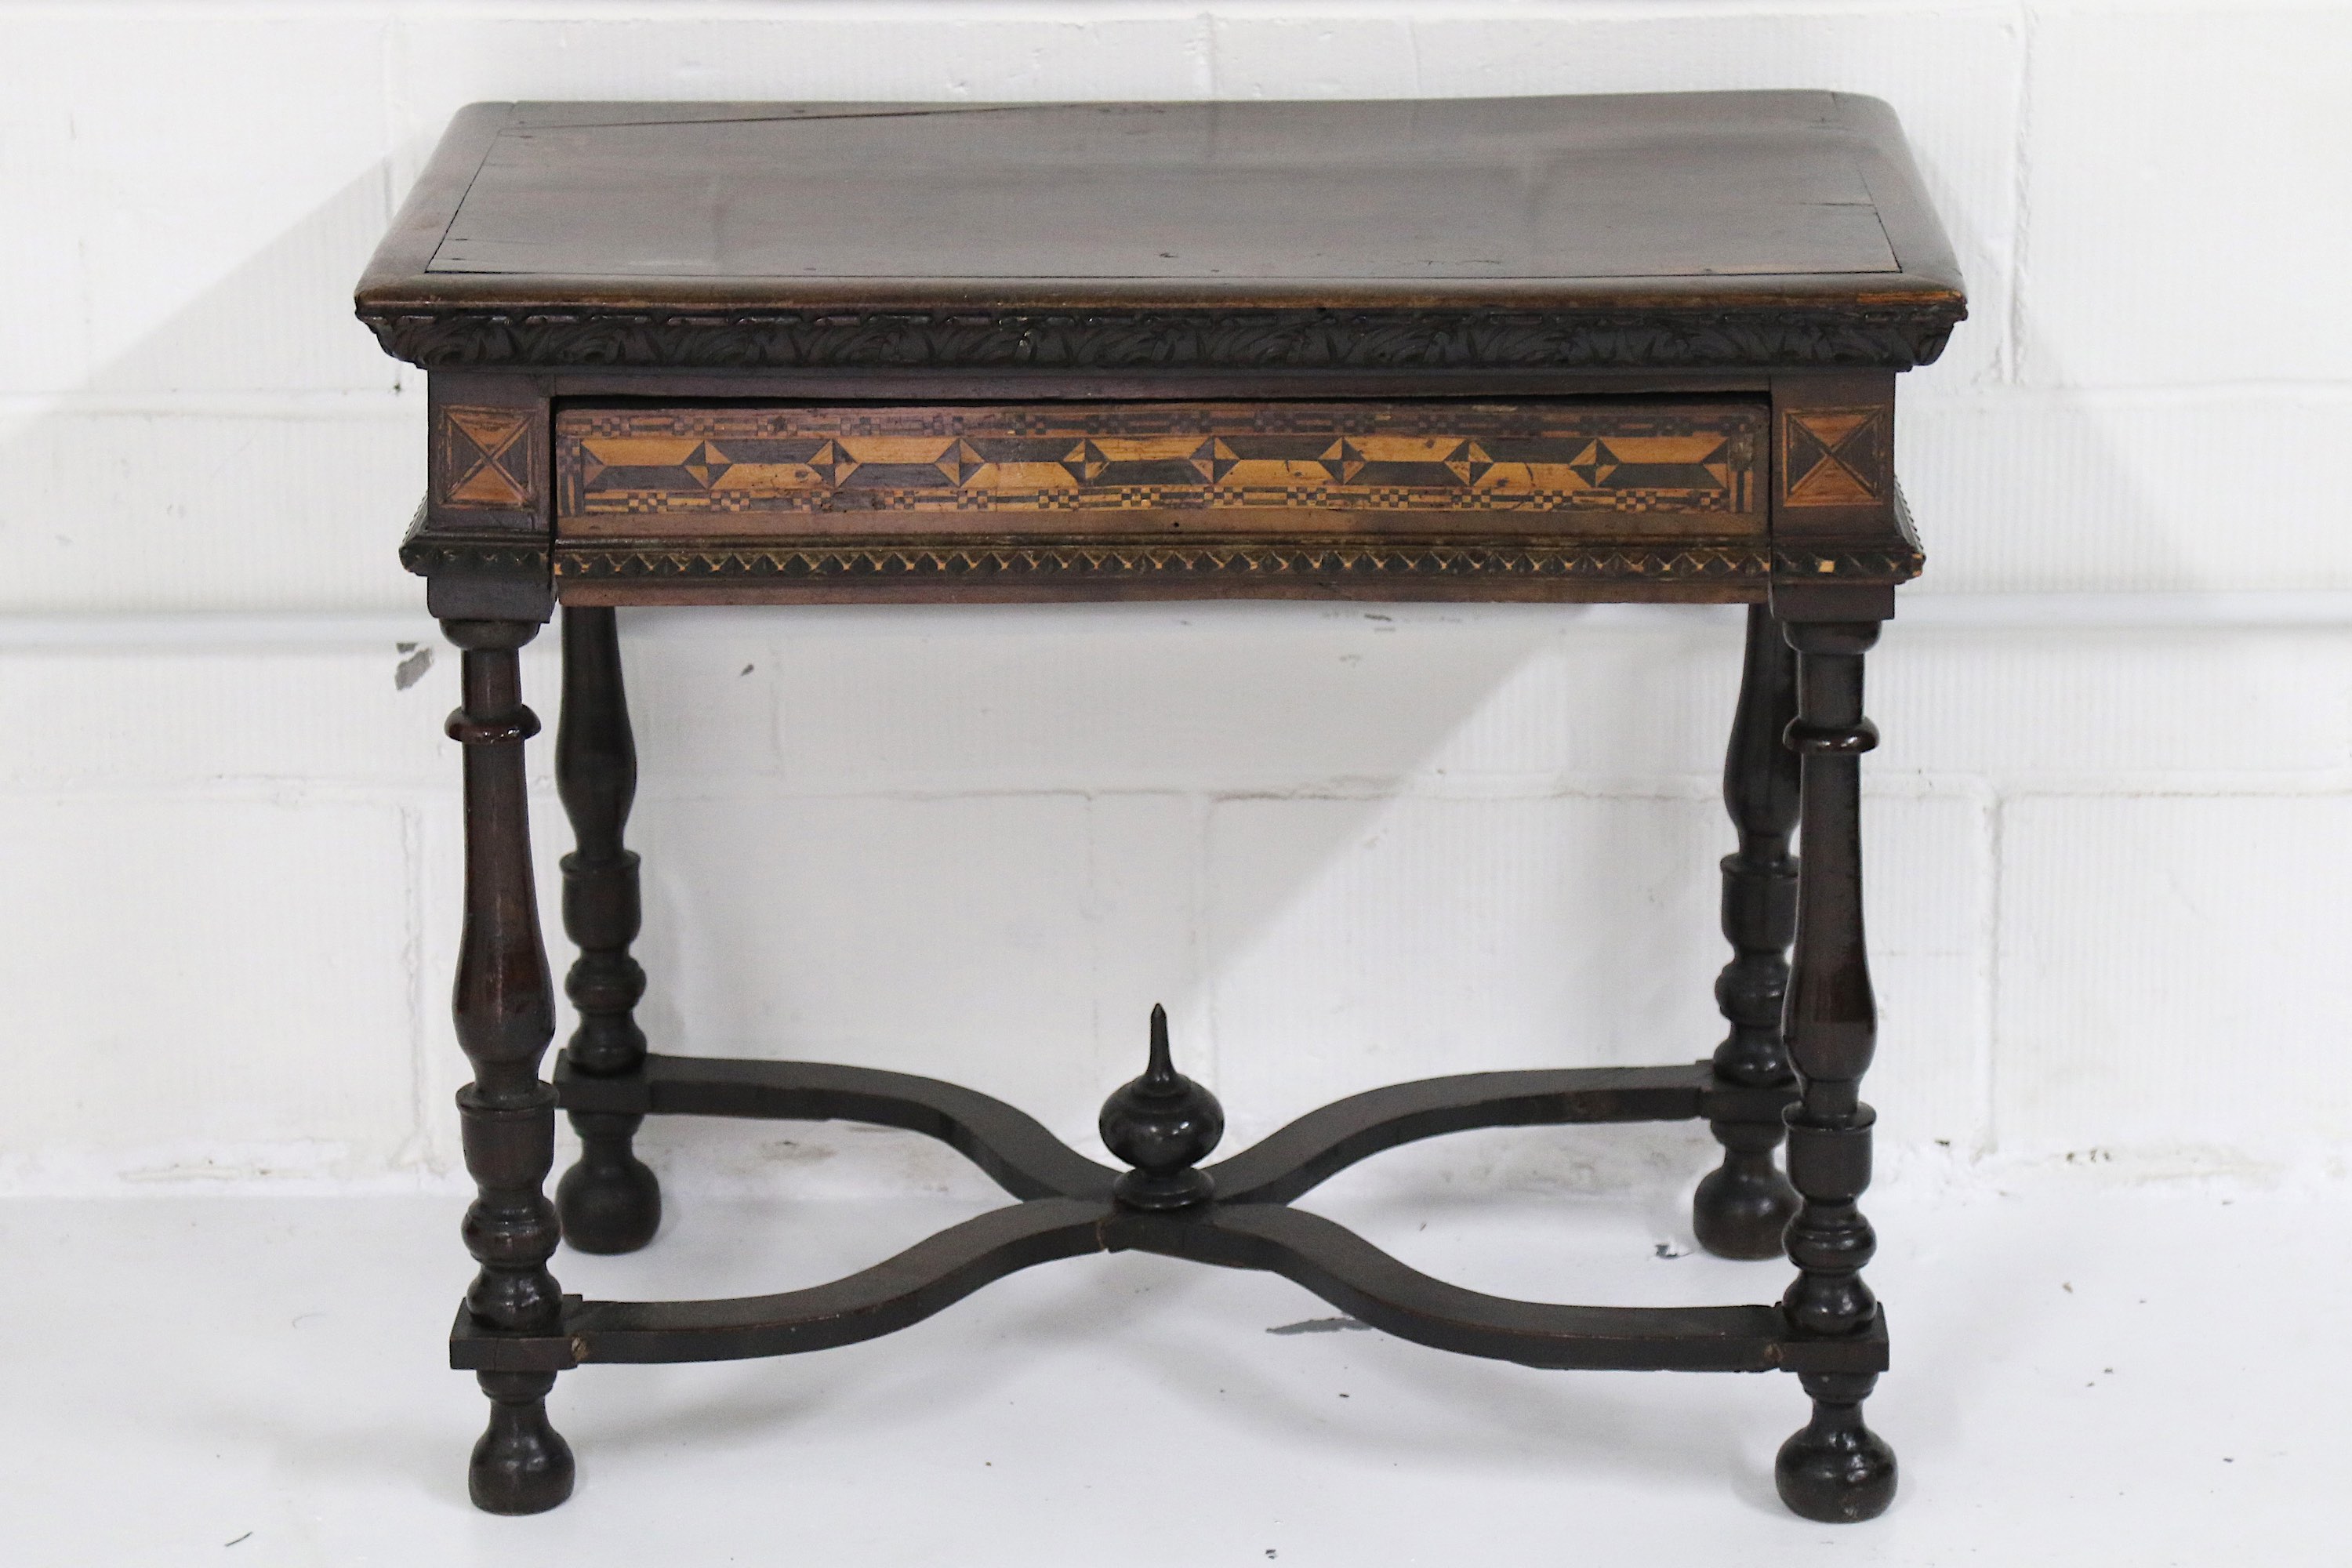 A 17th Century Italian walnut side table, the rectangular top with a carved leaf frieze, over a